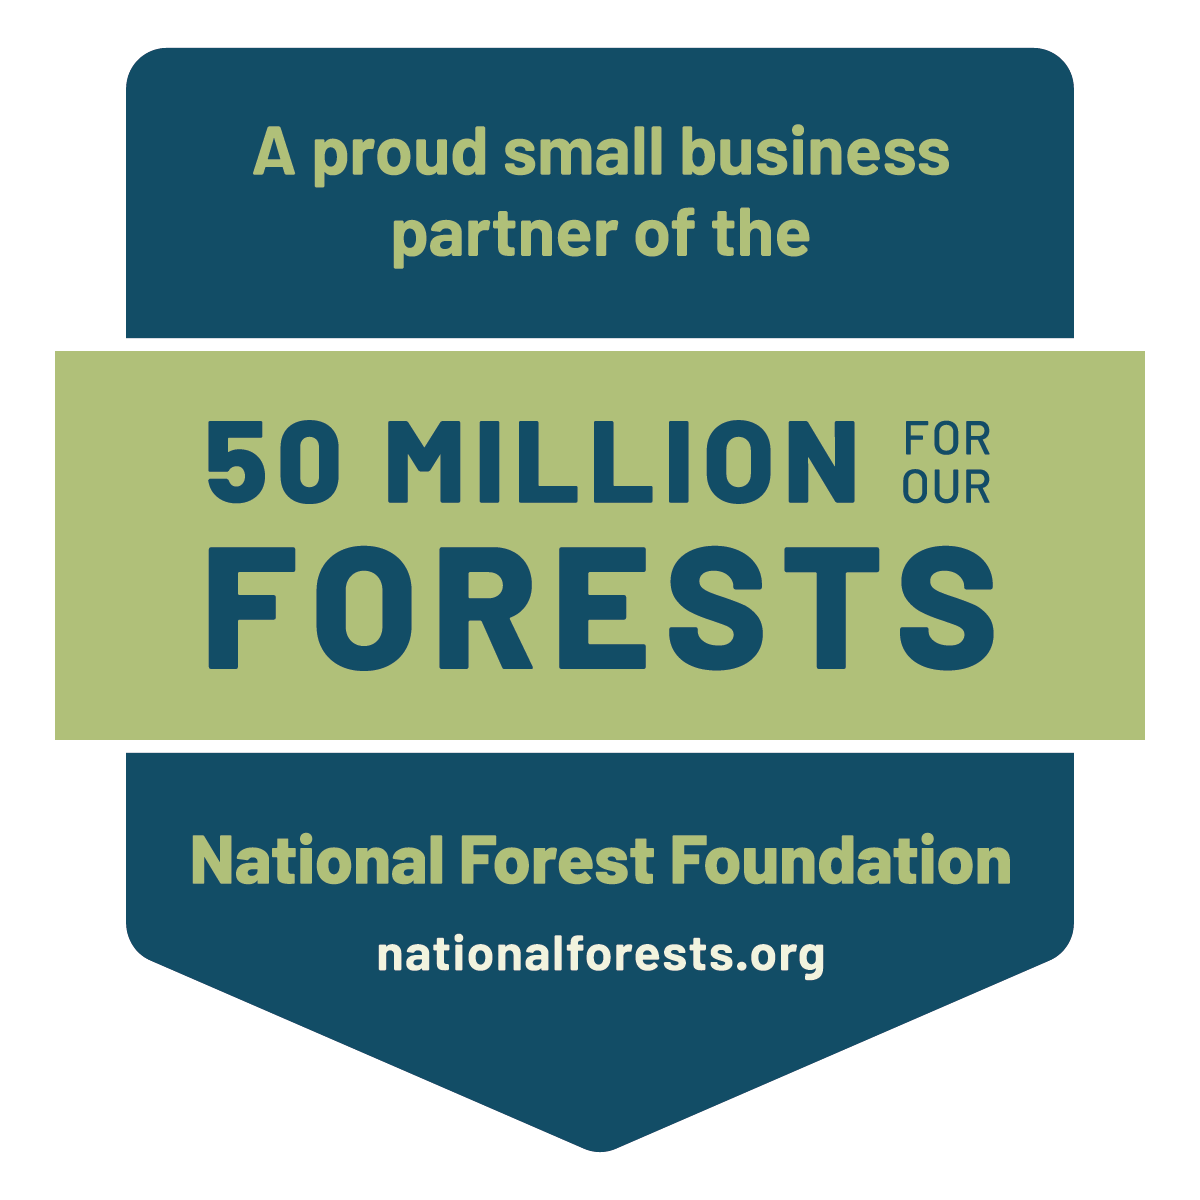 A proud small business partner of the 50 MILLION FOR OUR FORESTS National Forest Foundation